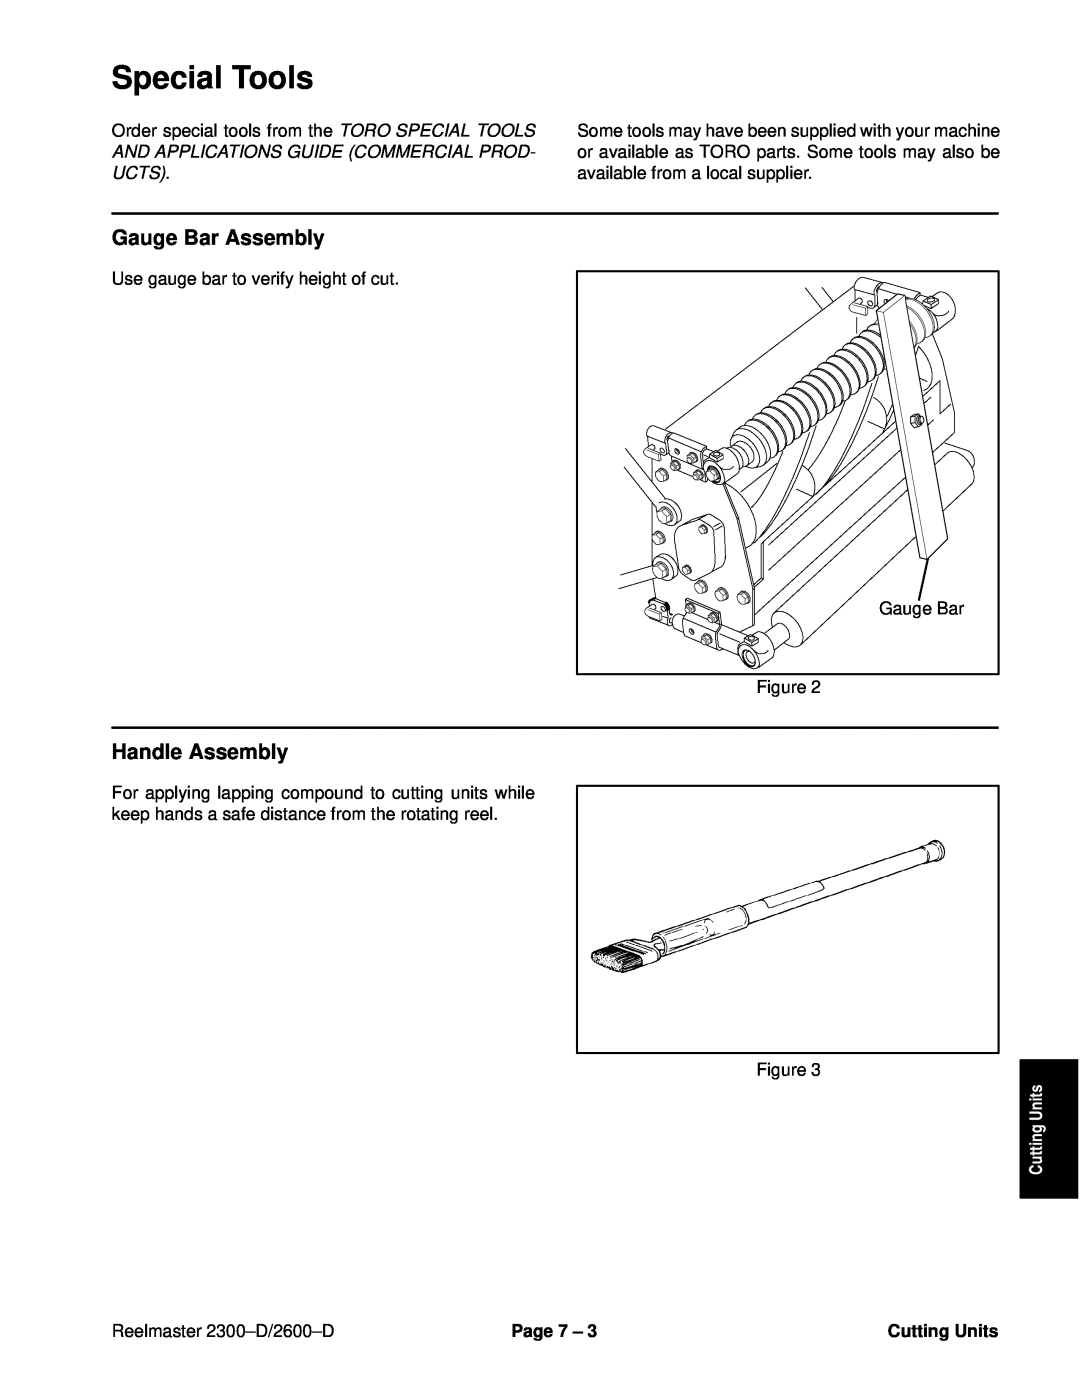 Toro 2600D, 2300-D Gauge Bar Assembly, Handle Assembly, Special Tools, Reelmaster 2300±D/2600±D, Page 7 ±, Cutting Units 